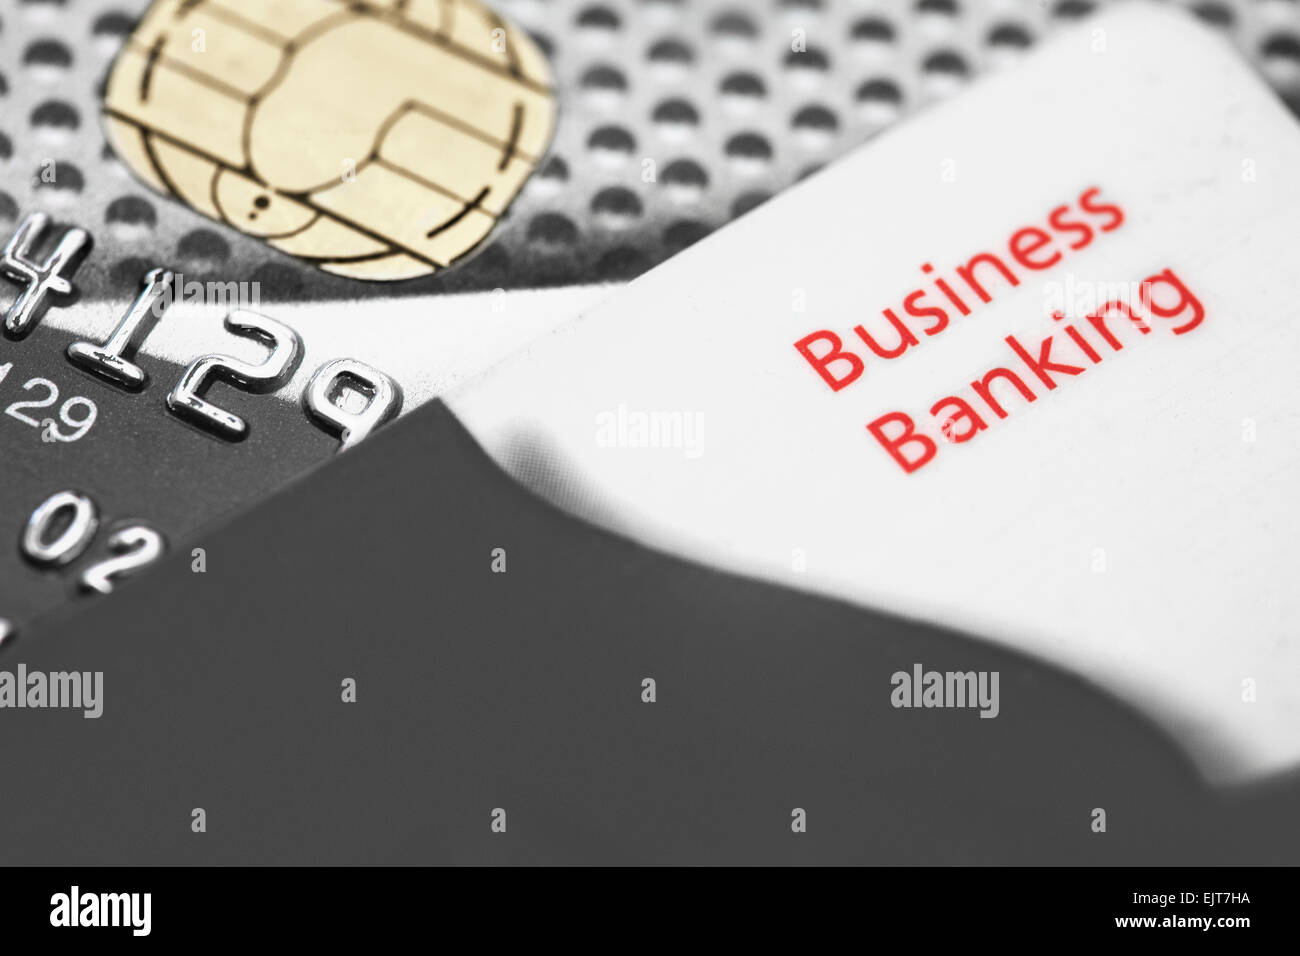 Business Credit and Bank Card Stock Photo